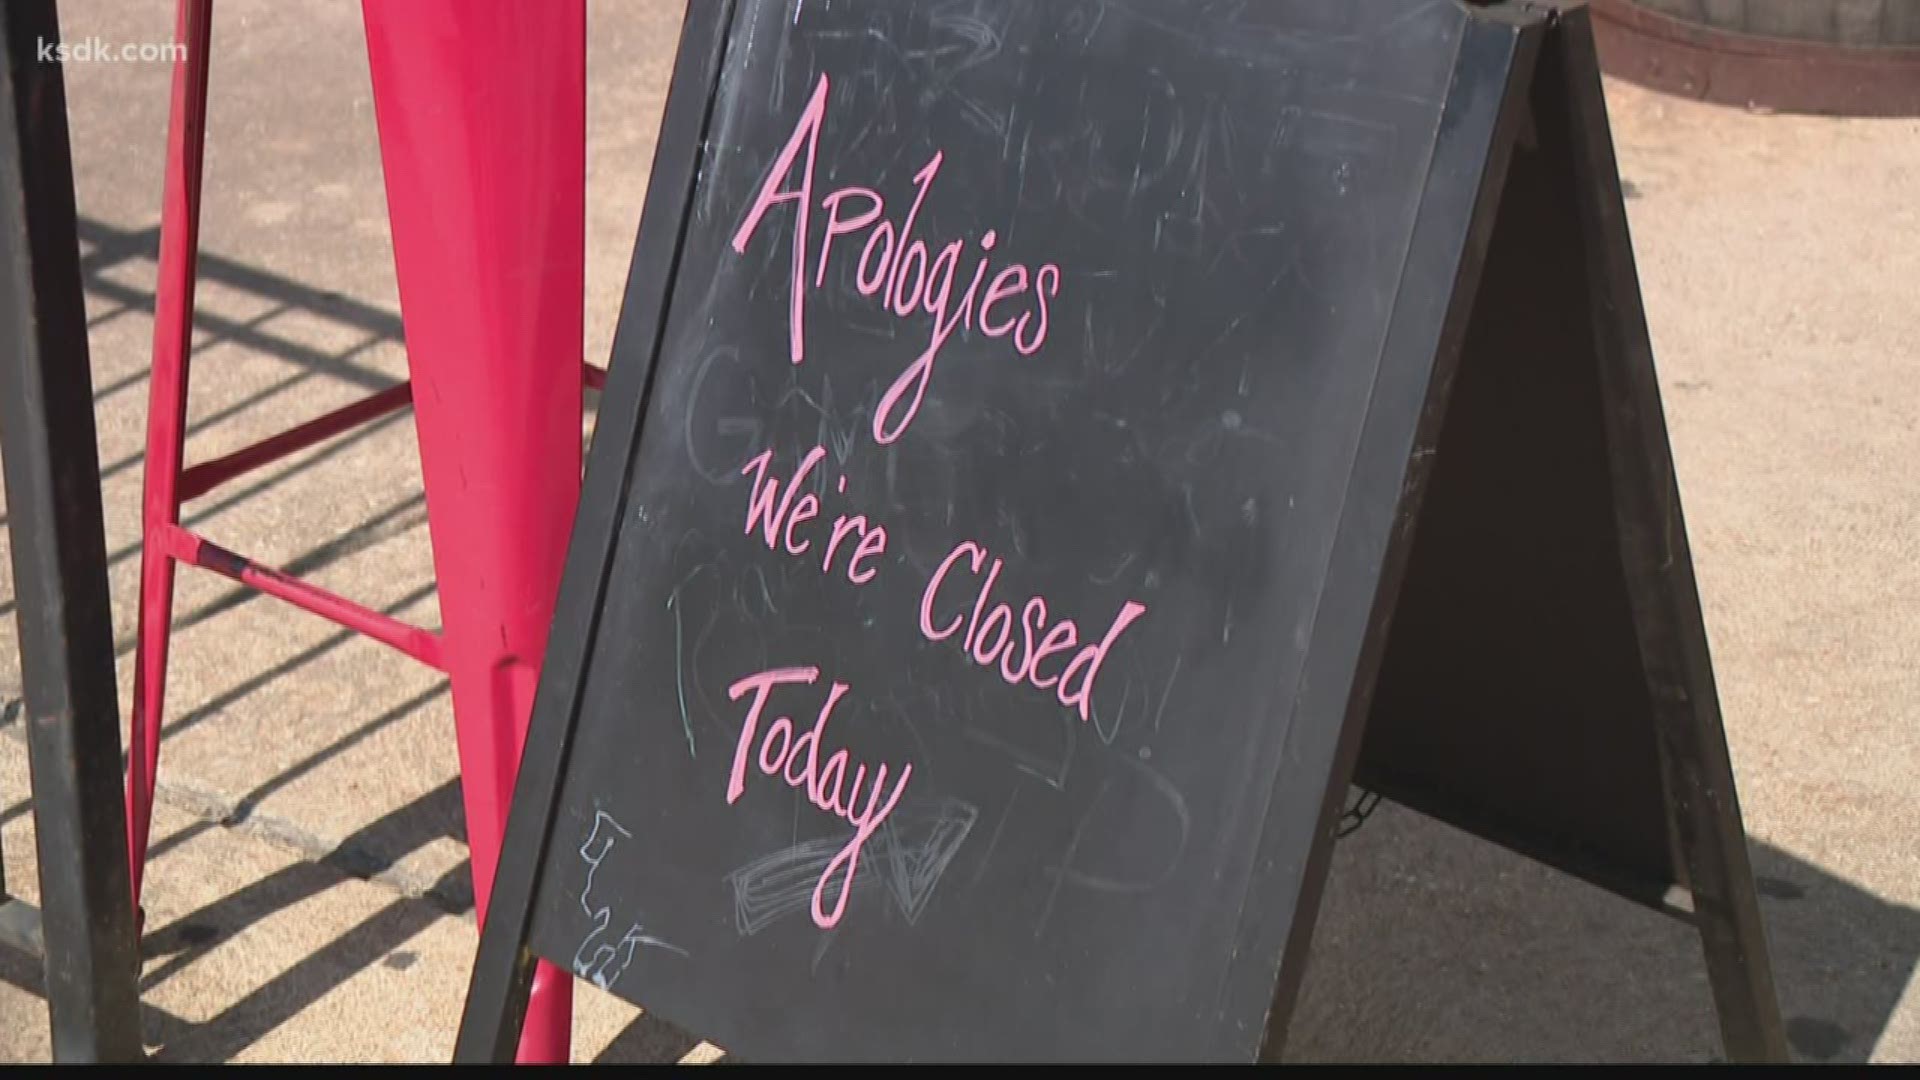 A sign outside Southtown Pub read, ‘Apologies, we’re closed today,’ but it turns out it wasn’t just closed for the day.